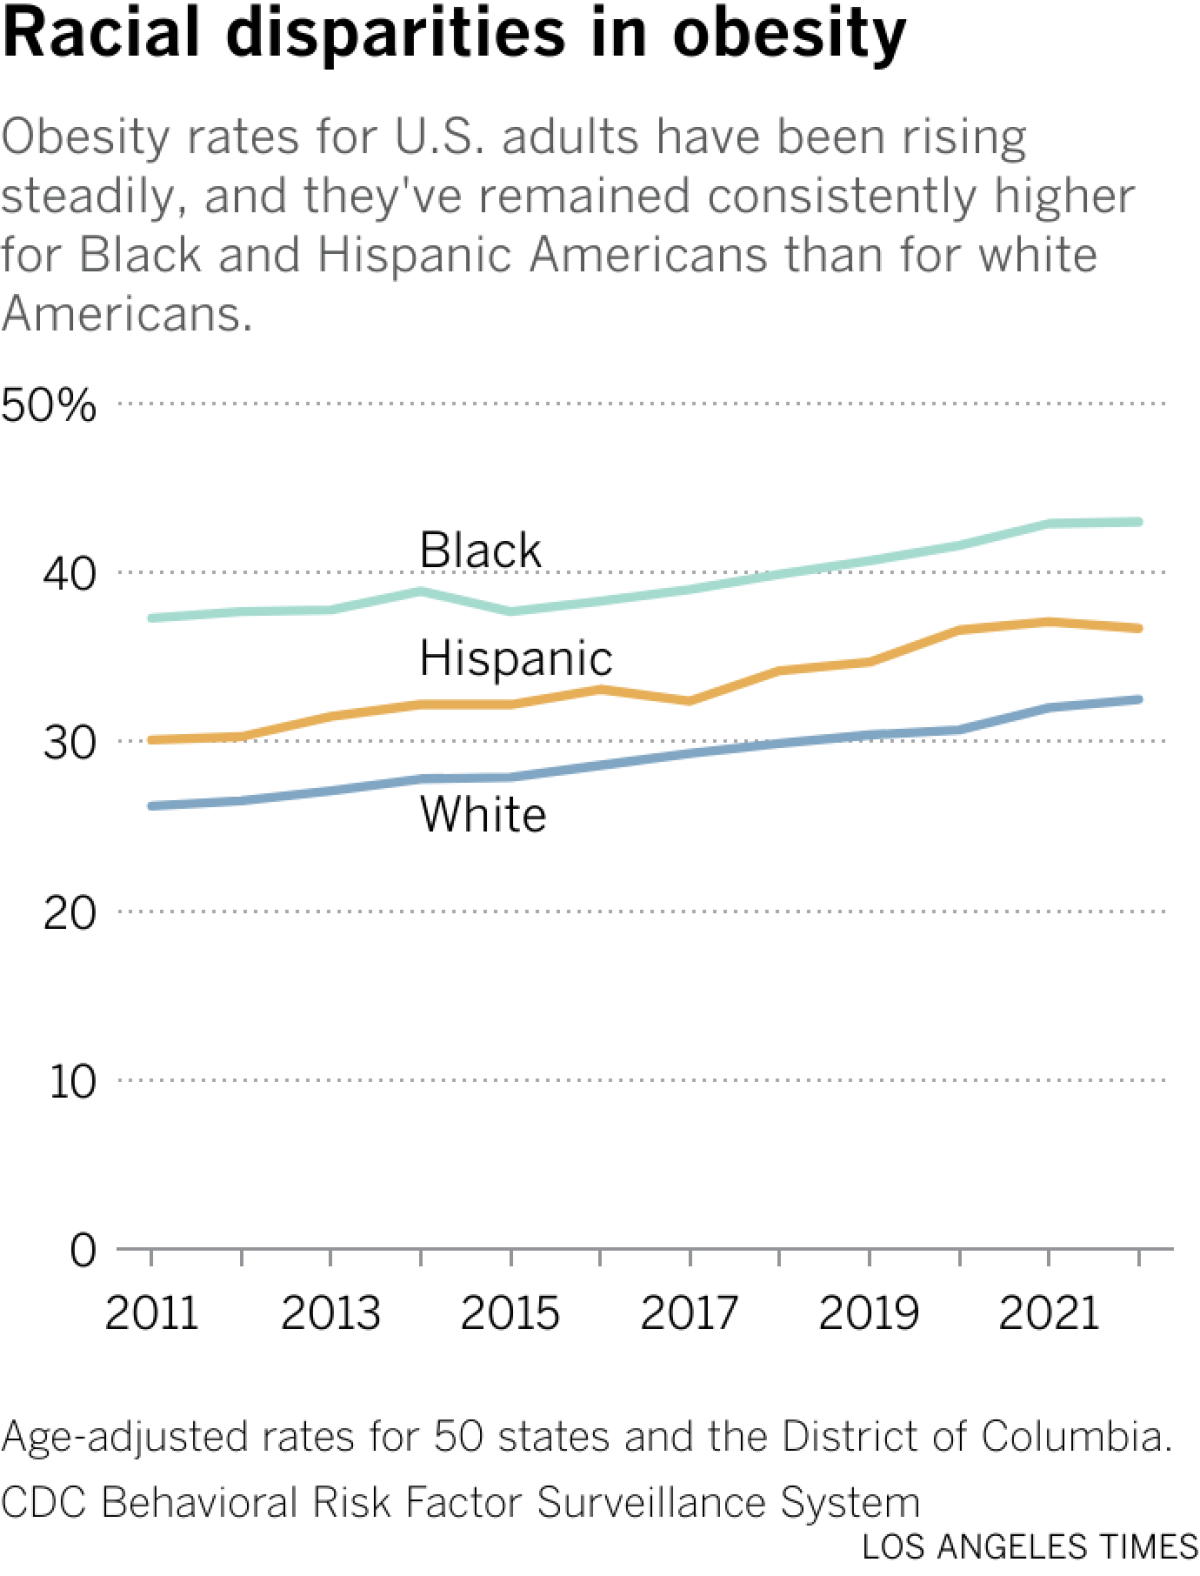 Obesity rates among American adults have steadily increased and have remained consistently higher for black and Hispanic Americans than for white Americans.